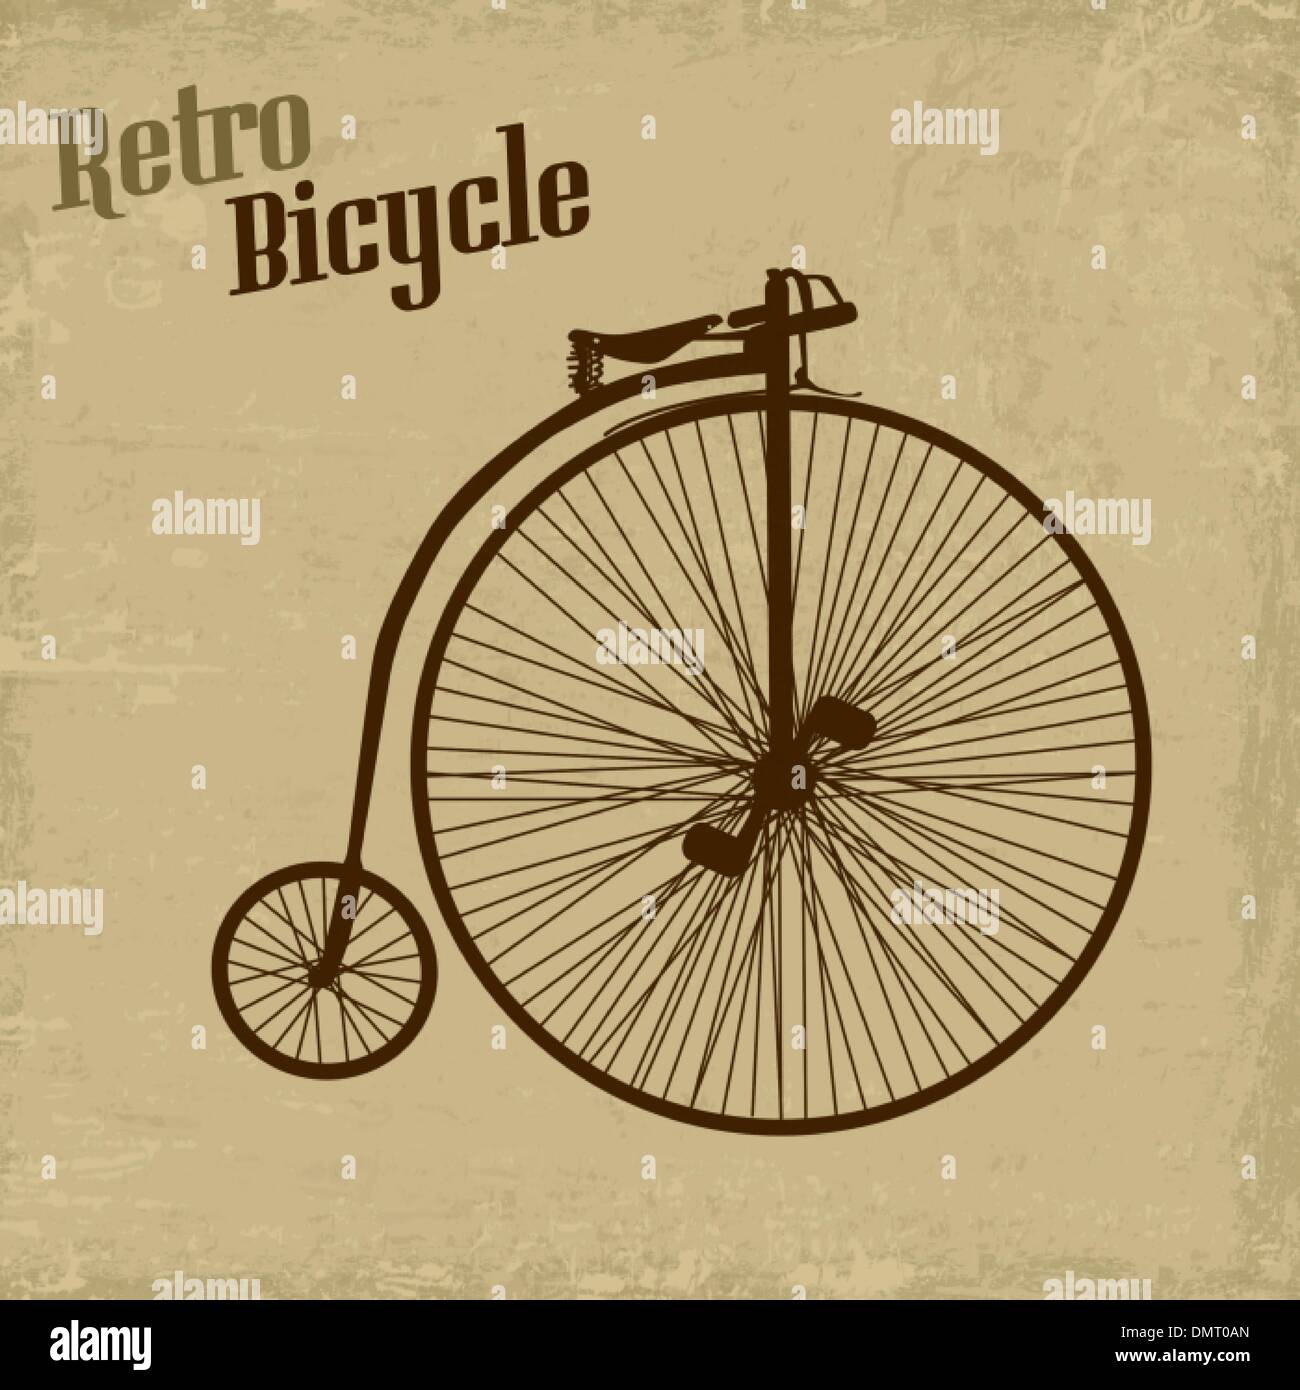 Bicycle vintage poster Stock Vector